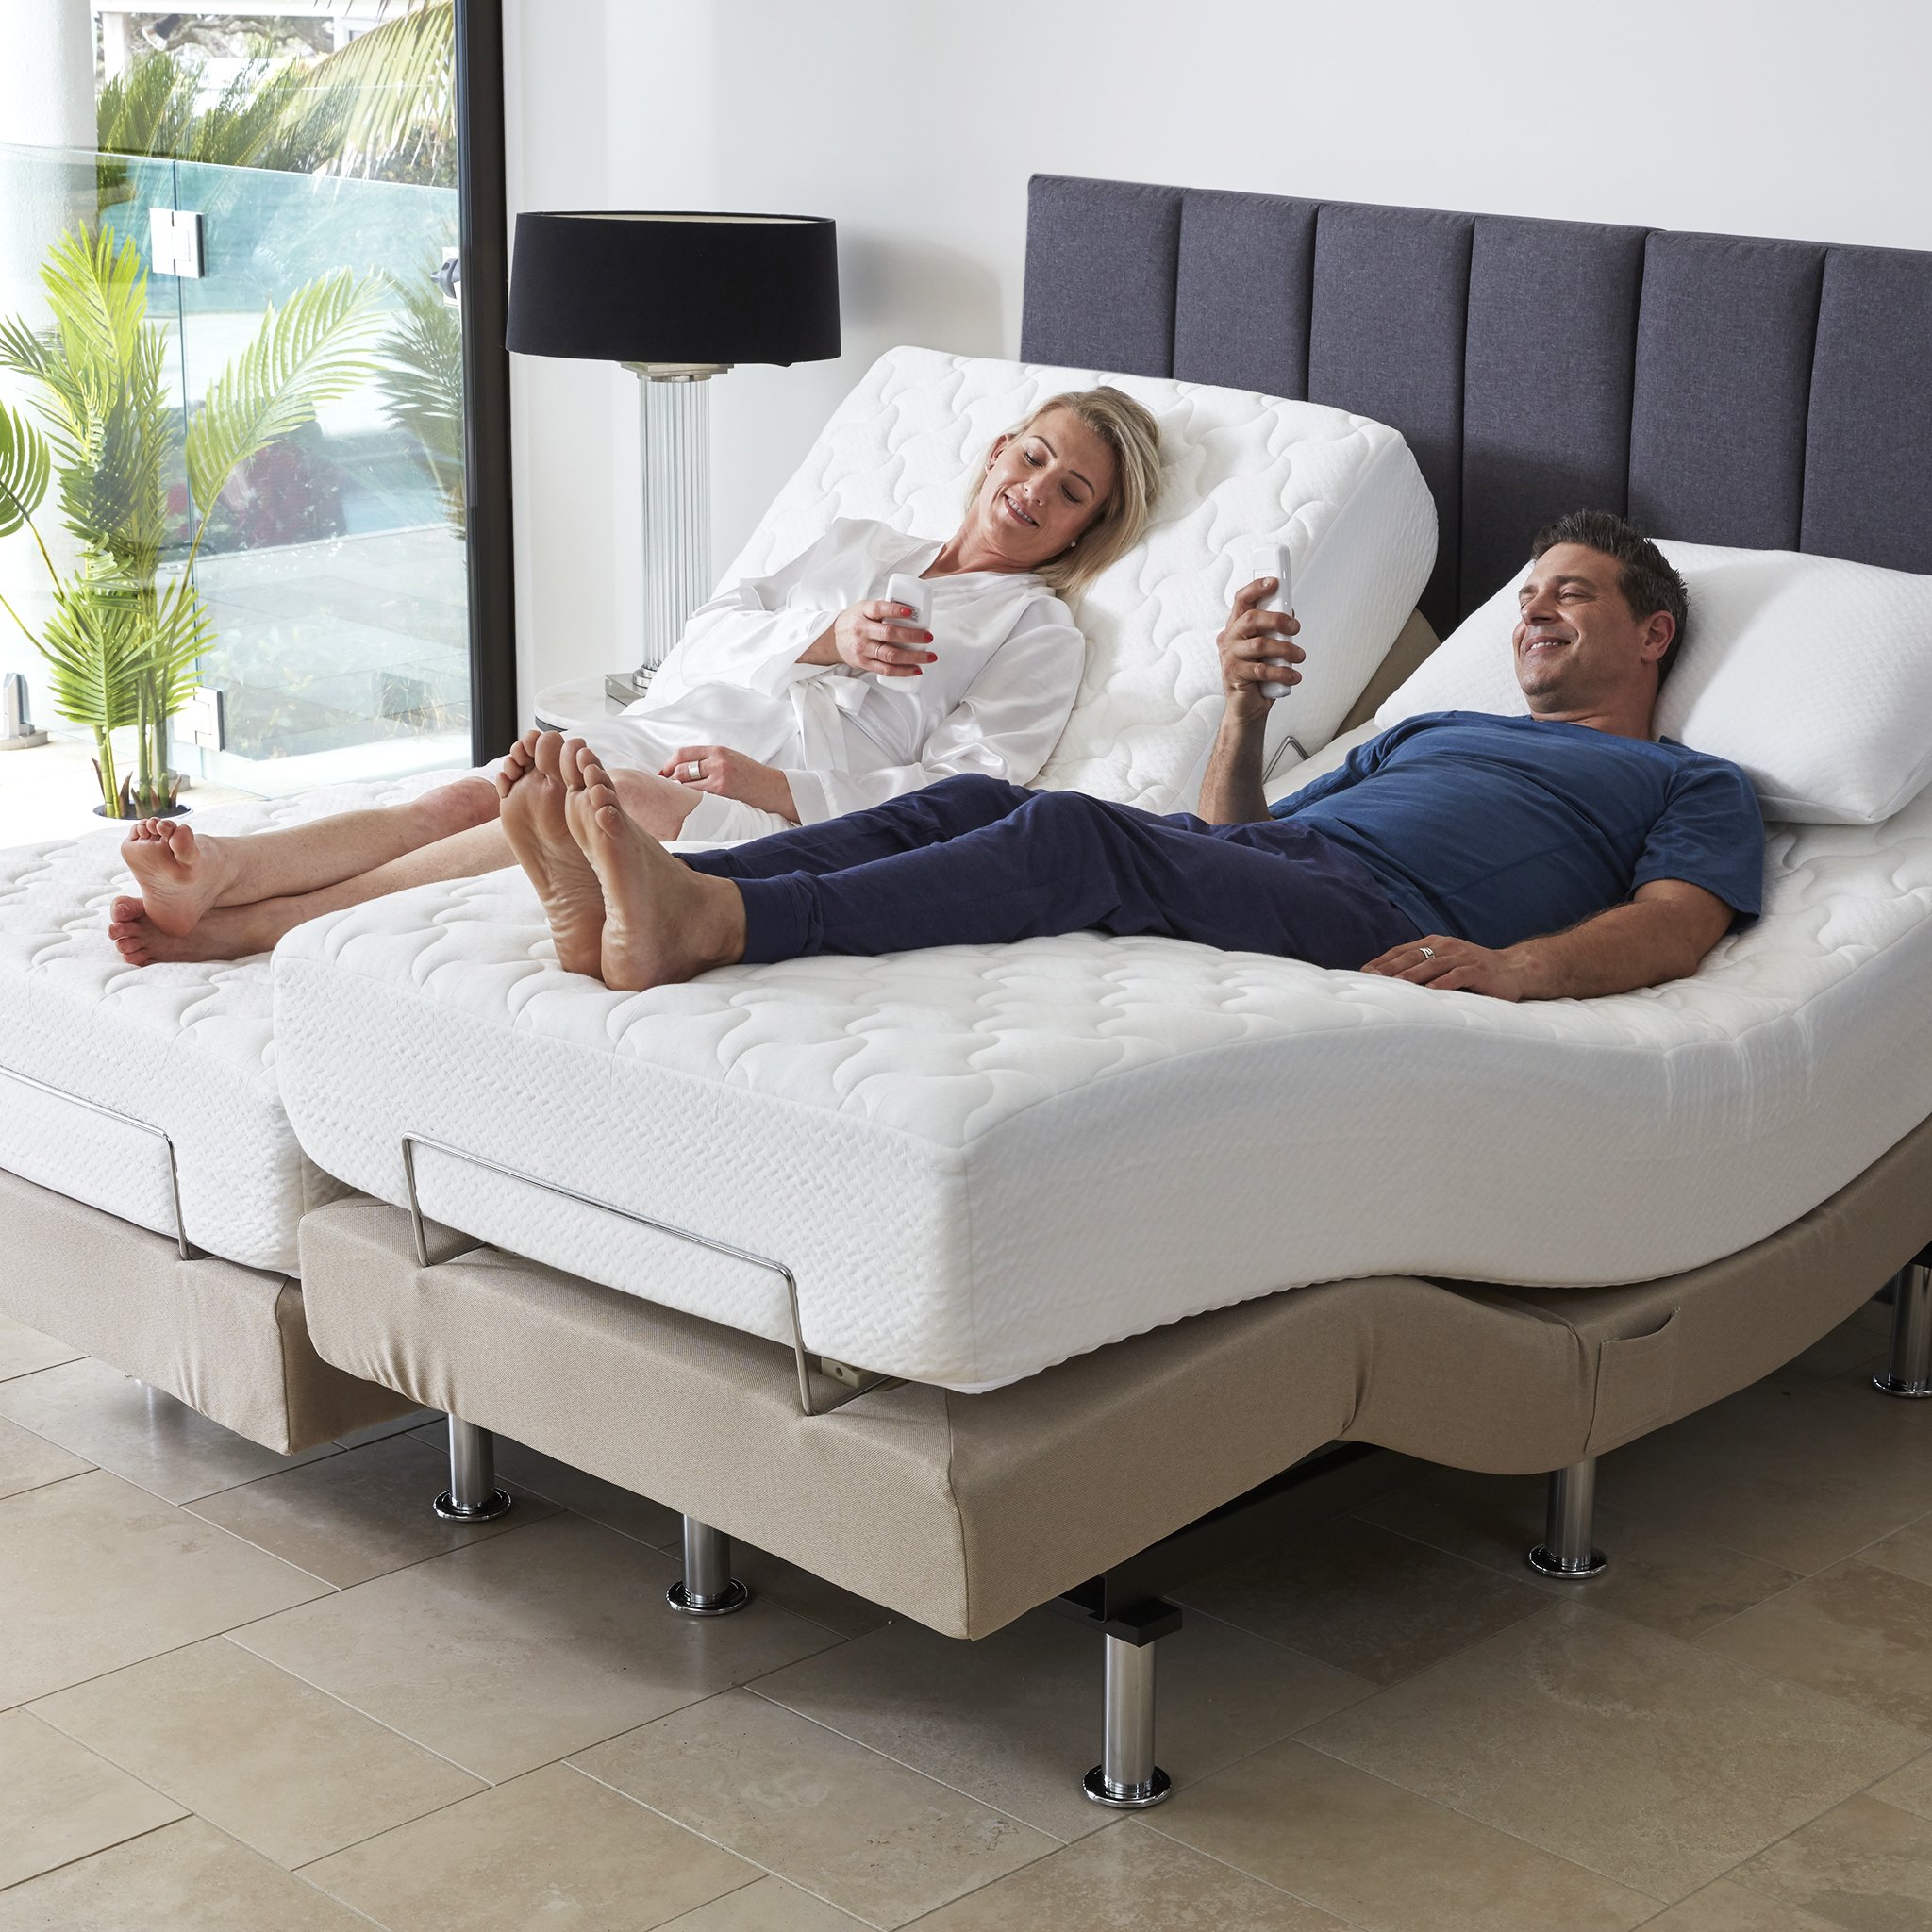 Adjustable mattresses with remote controls